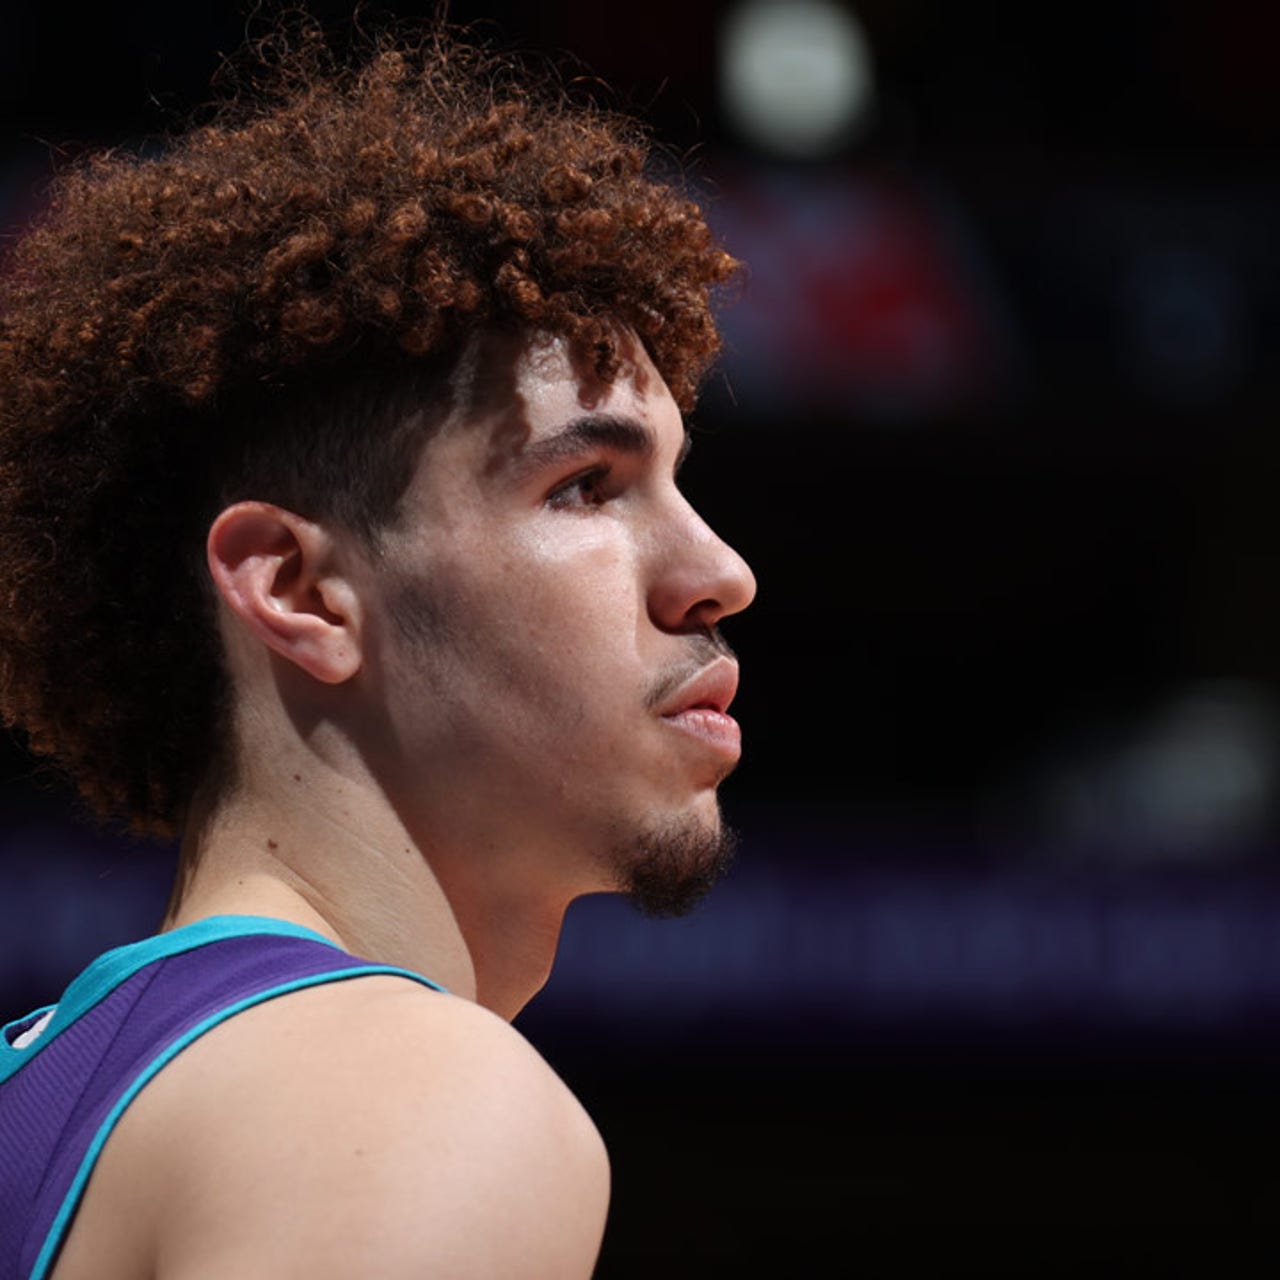 Hornets' LaMelo Ball named 2020-21 NBA Rookie of the Year